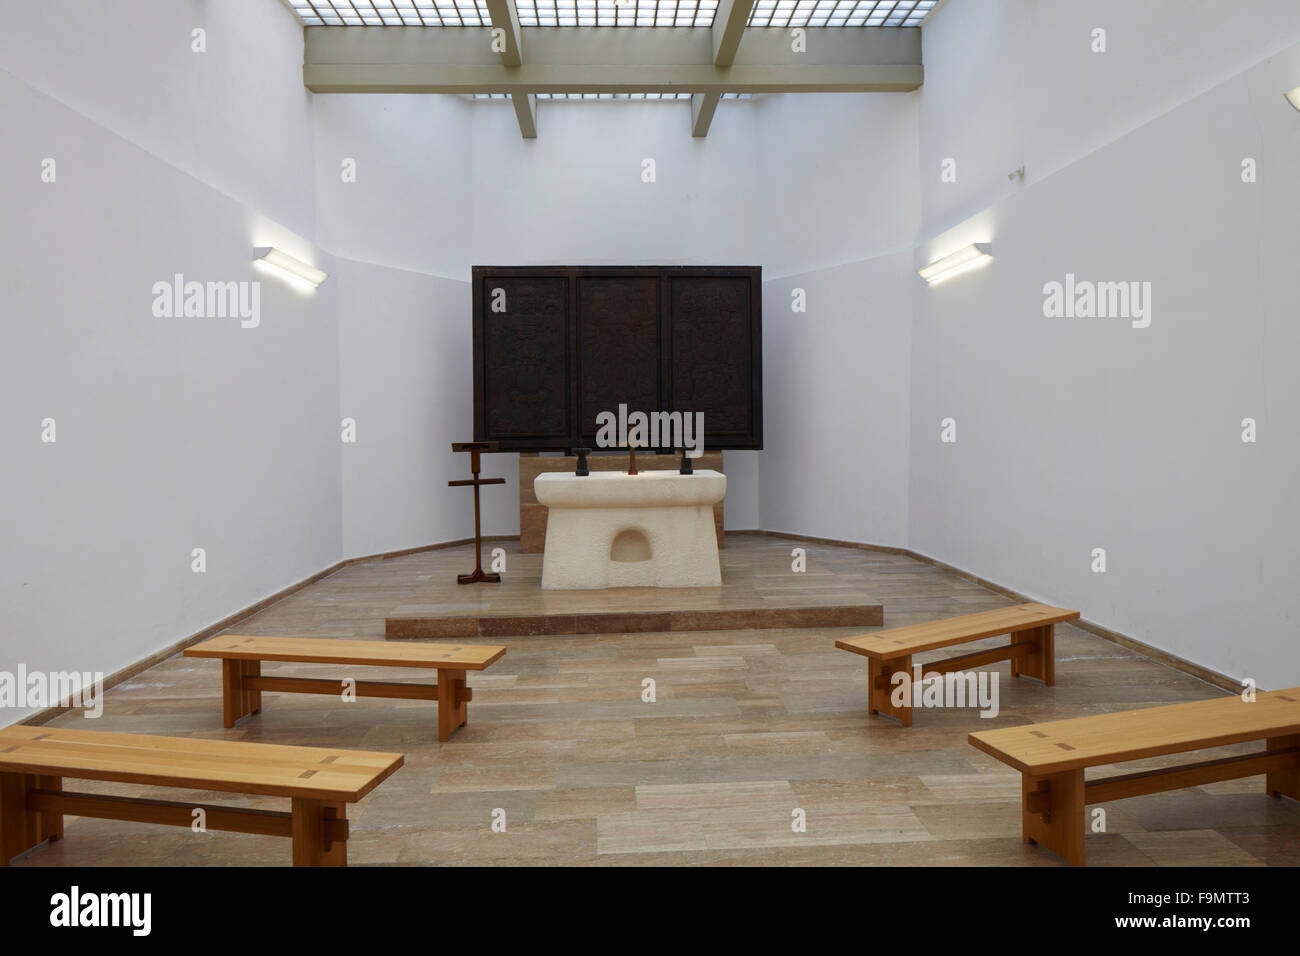 Altar and triptych by artist Rudolf Kedl. The simple white painted interior of the chapel with benches at Battle of Mogersdorf  Memorial Chapel Schloesselberg, Mogersdorf, Austria Stock Photo